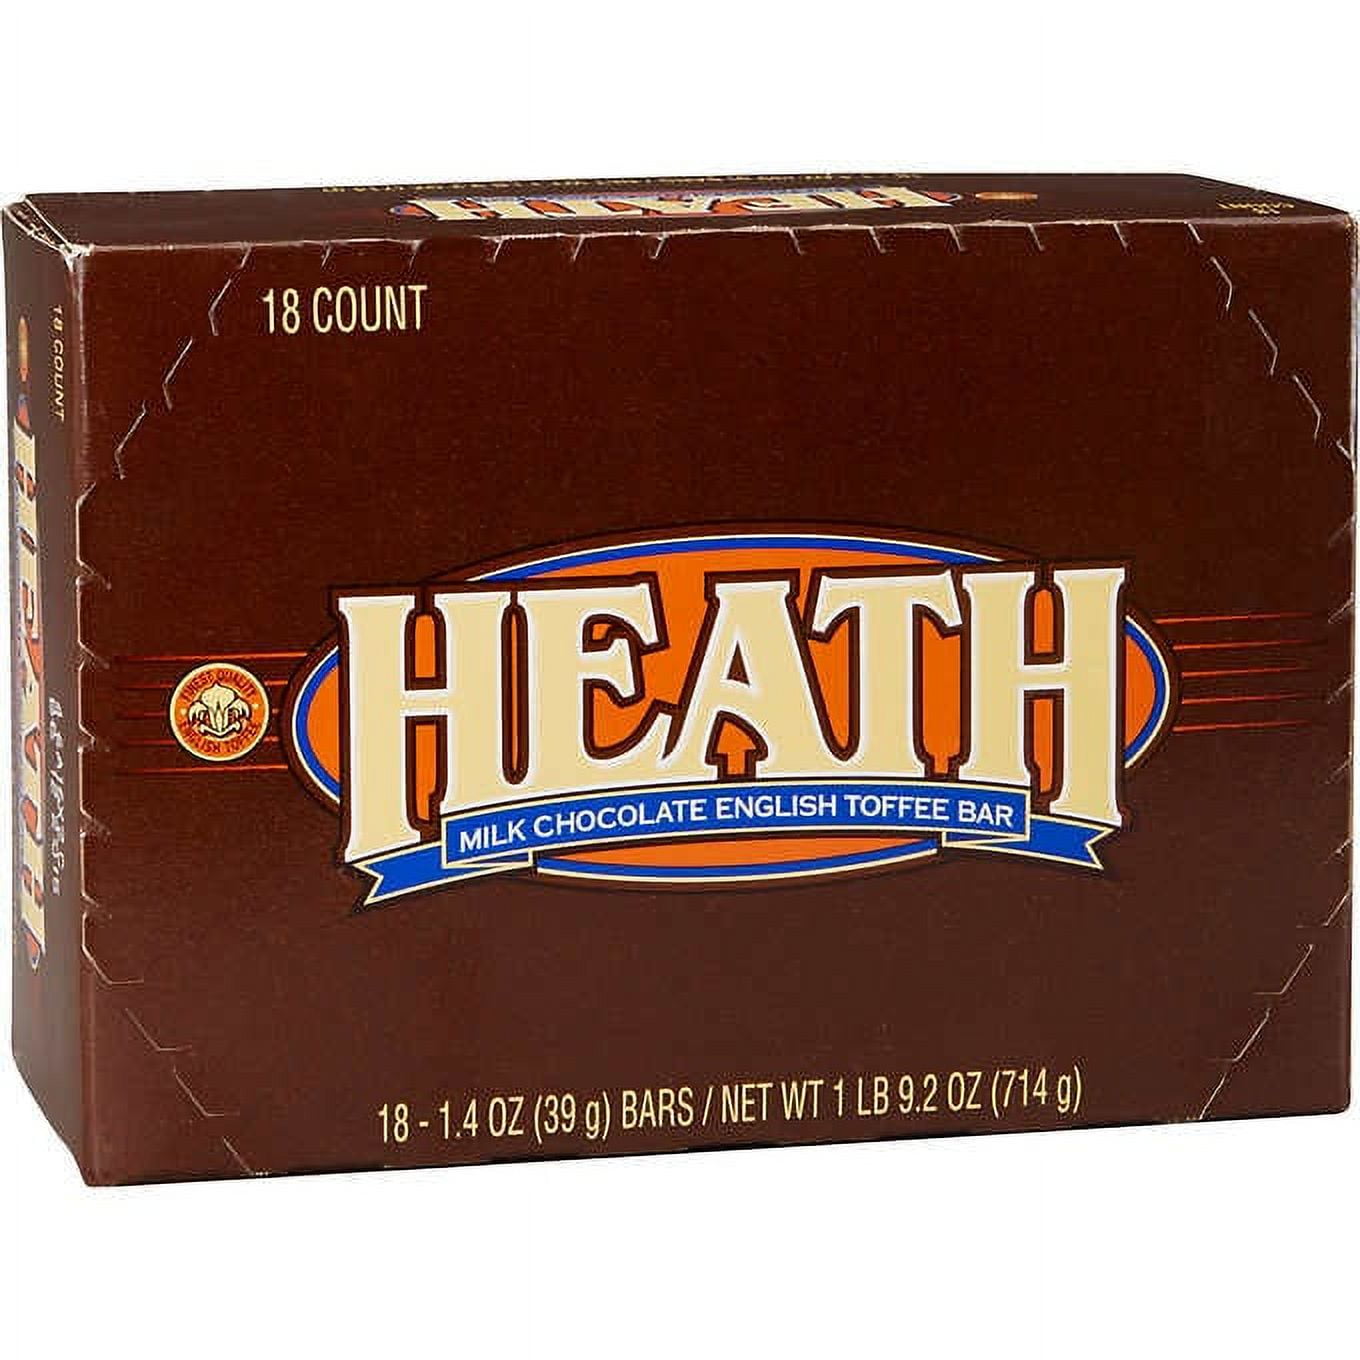 HEATH Milk Chocolate English Toffee Halloween Candy, Bulk, 1.4 Oz, Bars (18  Count) 18 Count (Pack of 1)